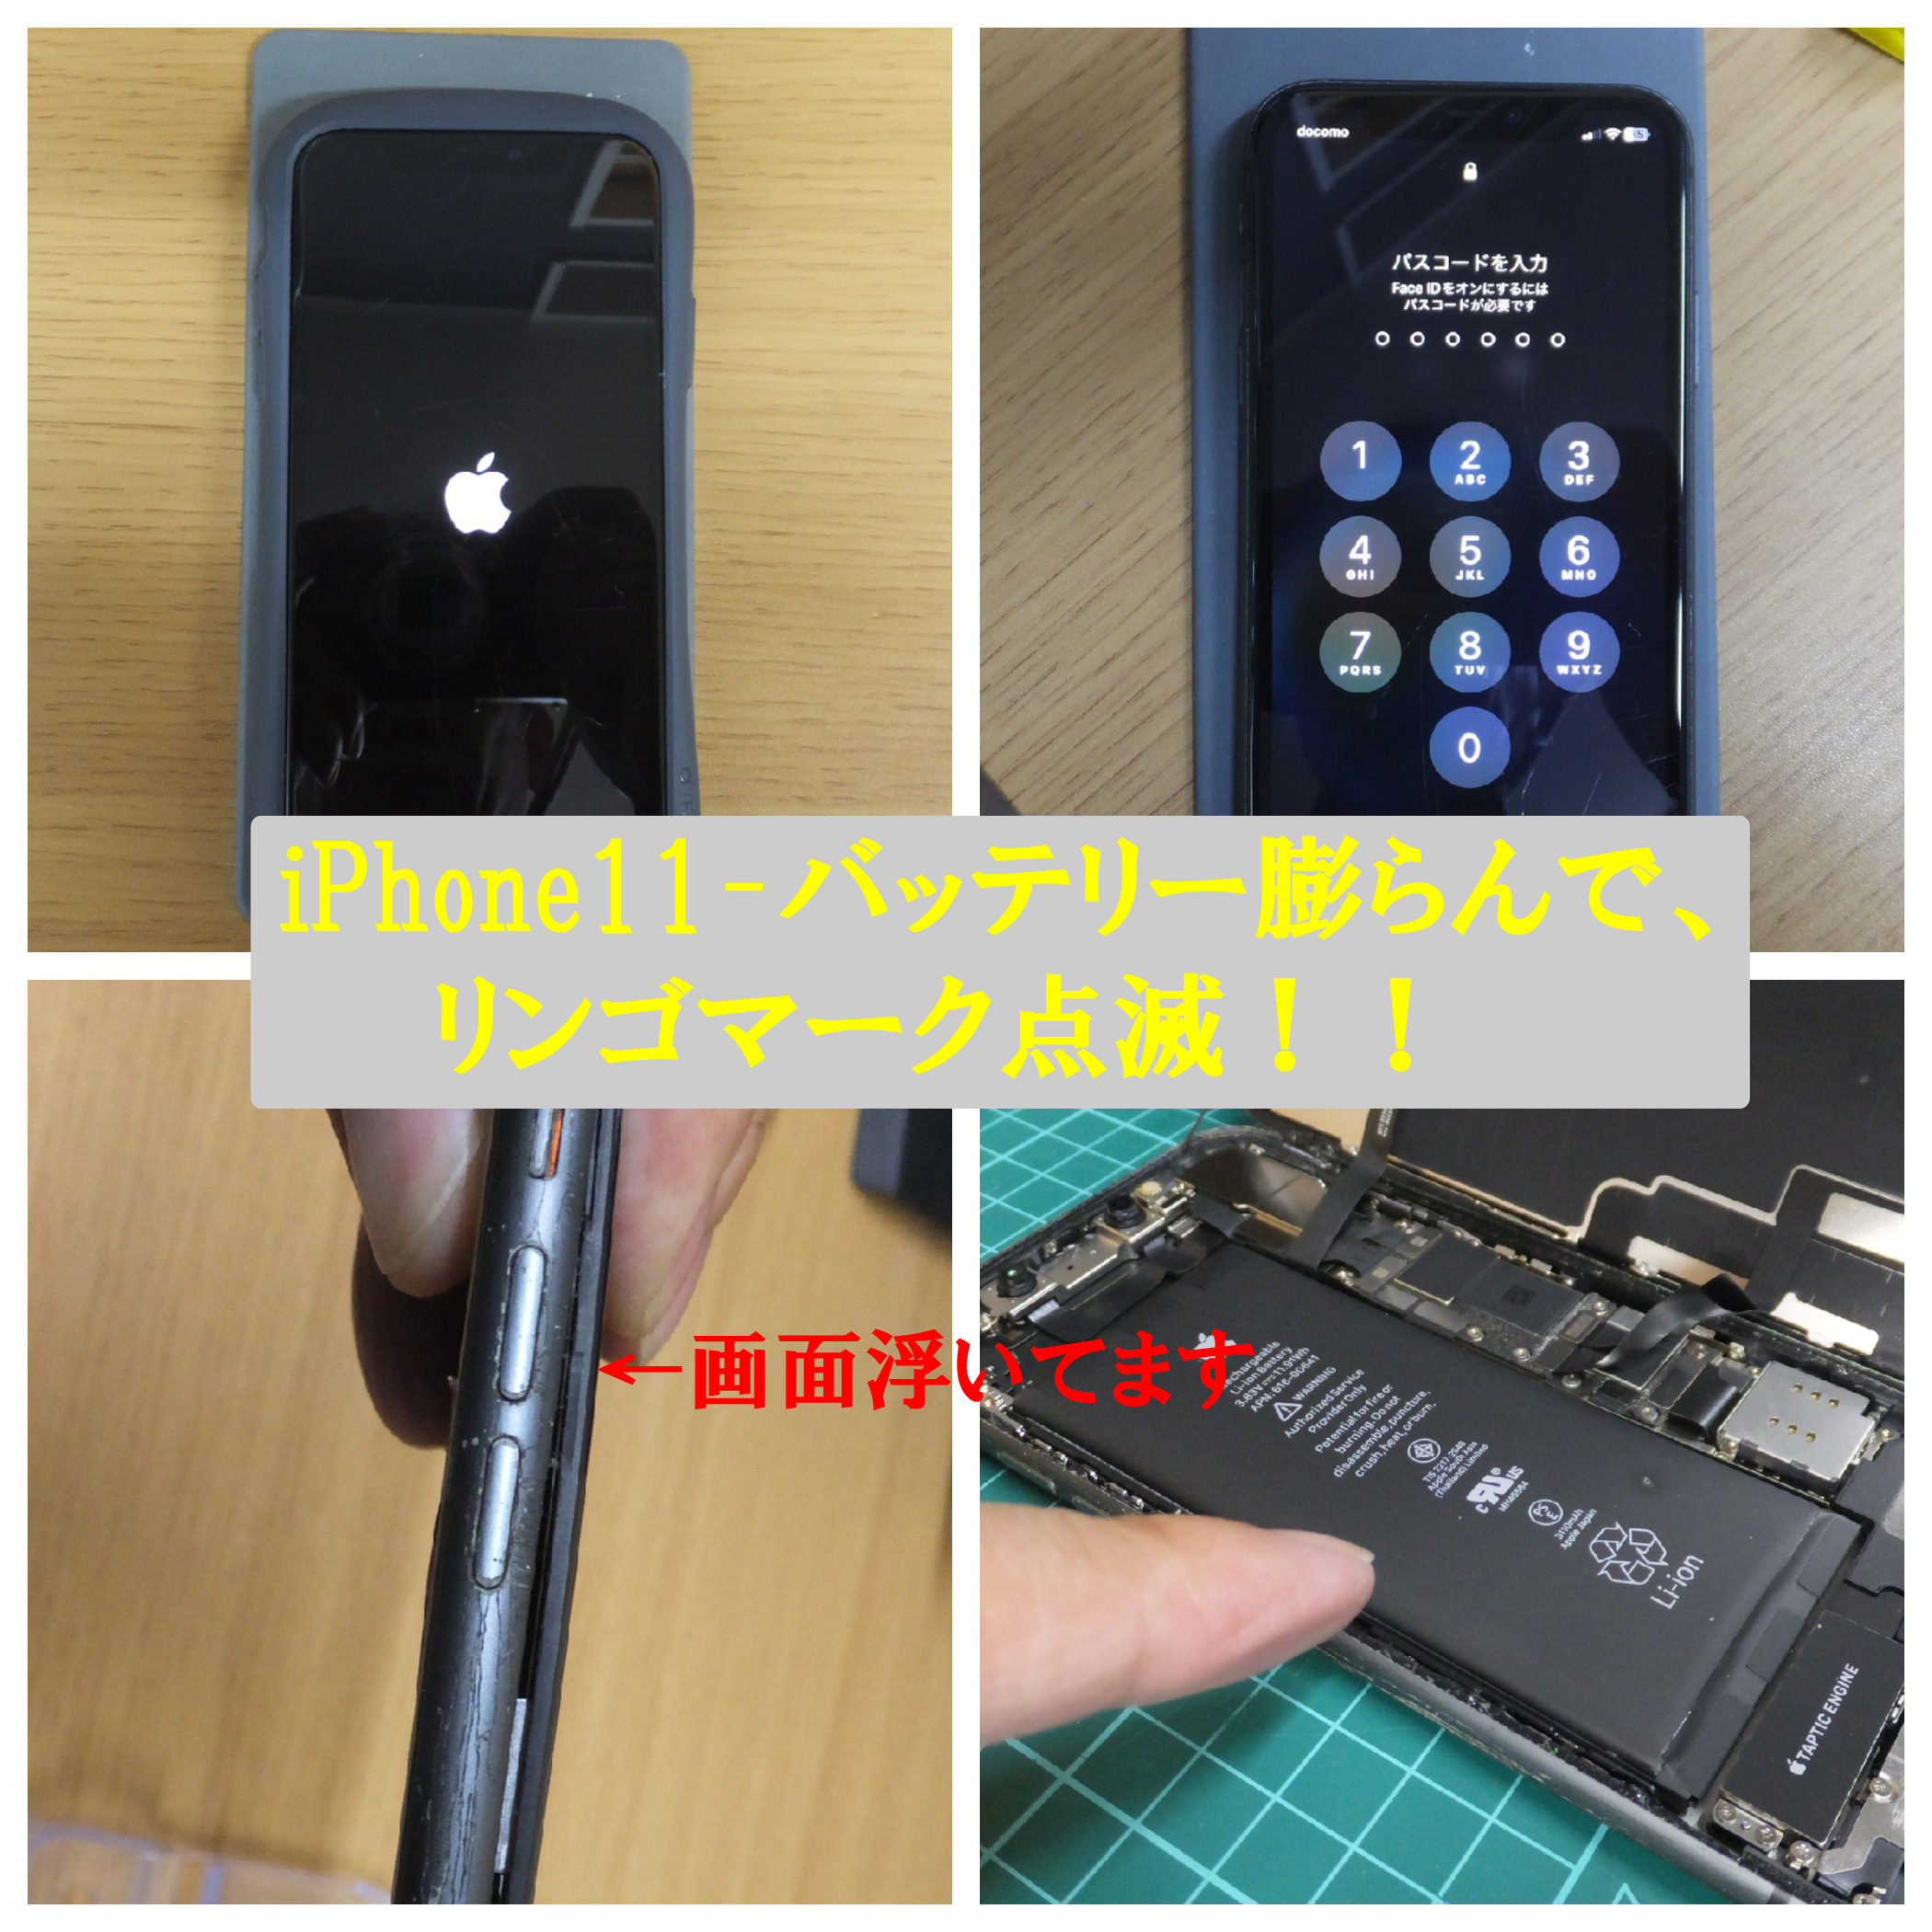 iPhone11-状況から説明。